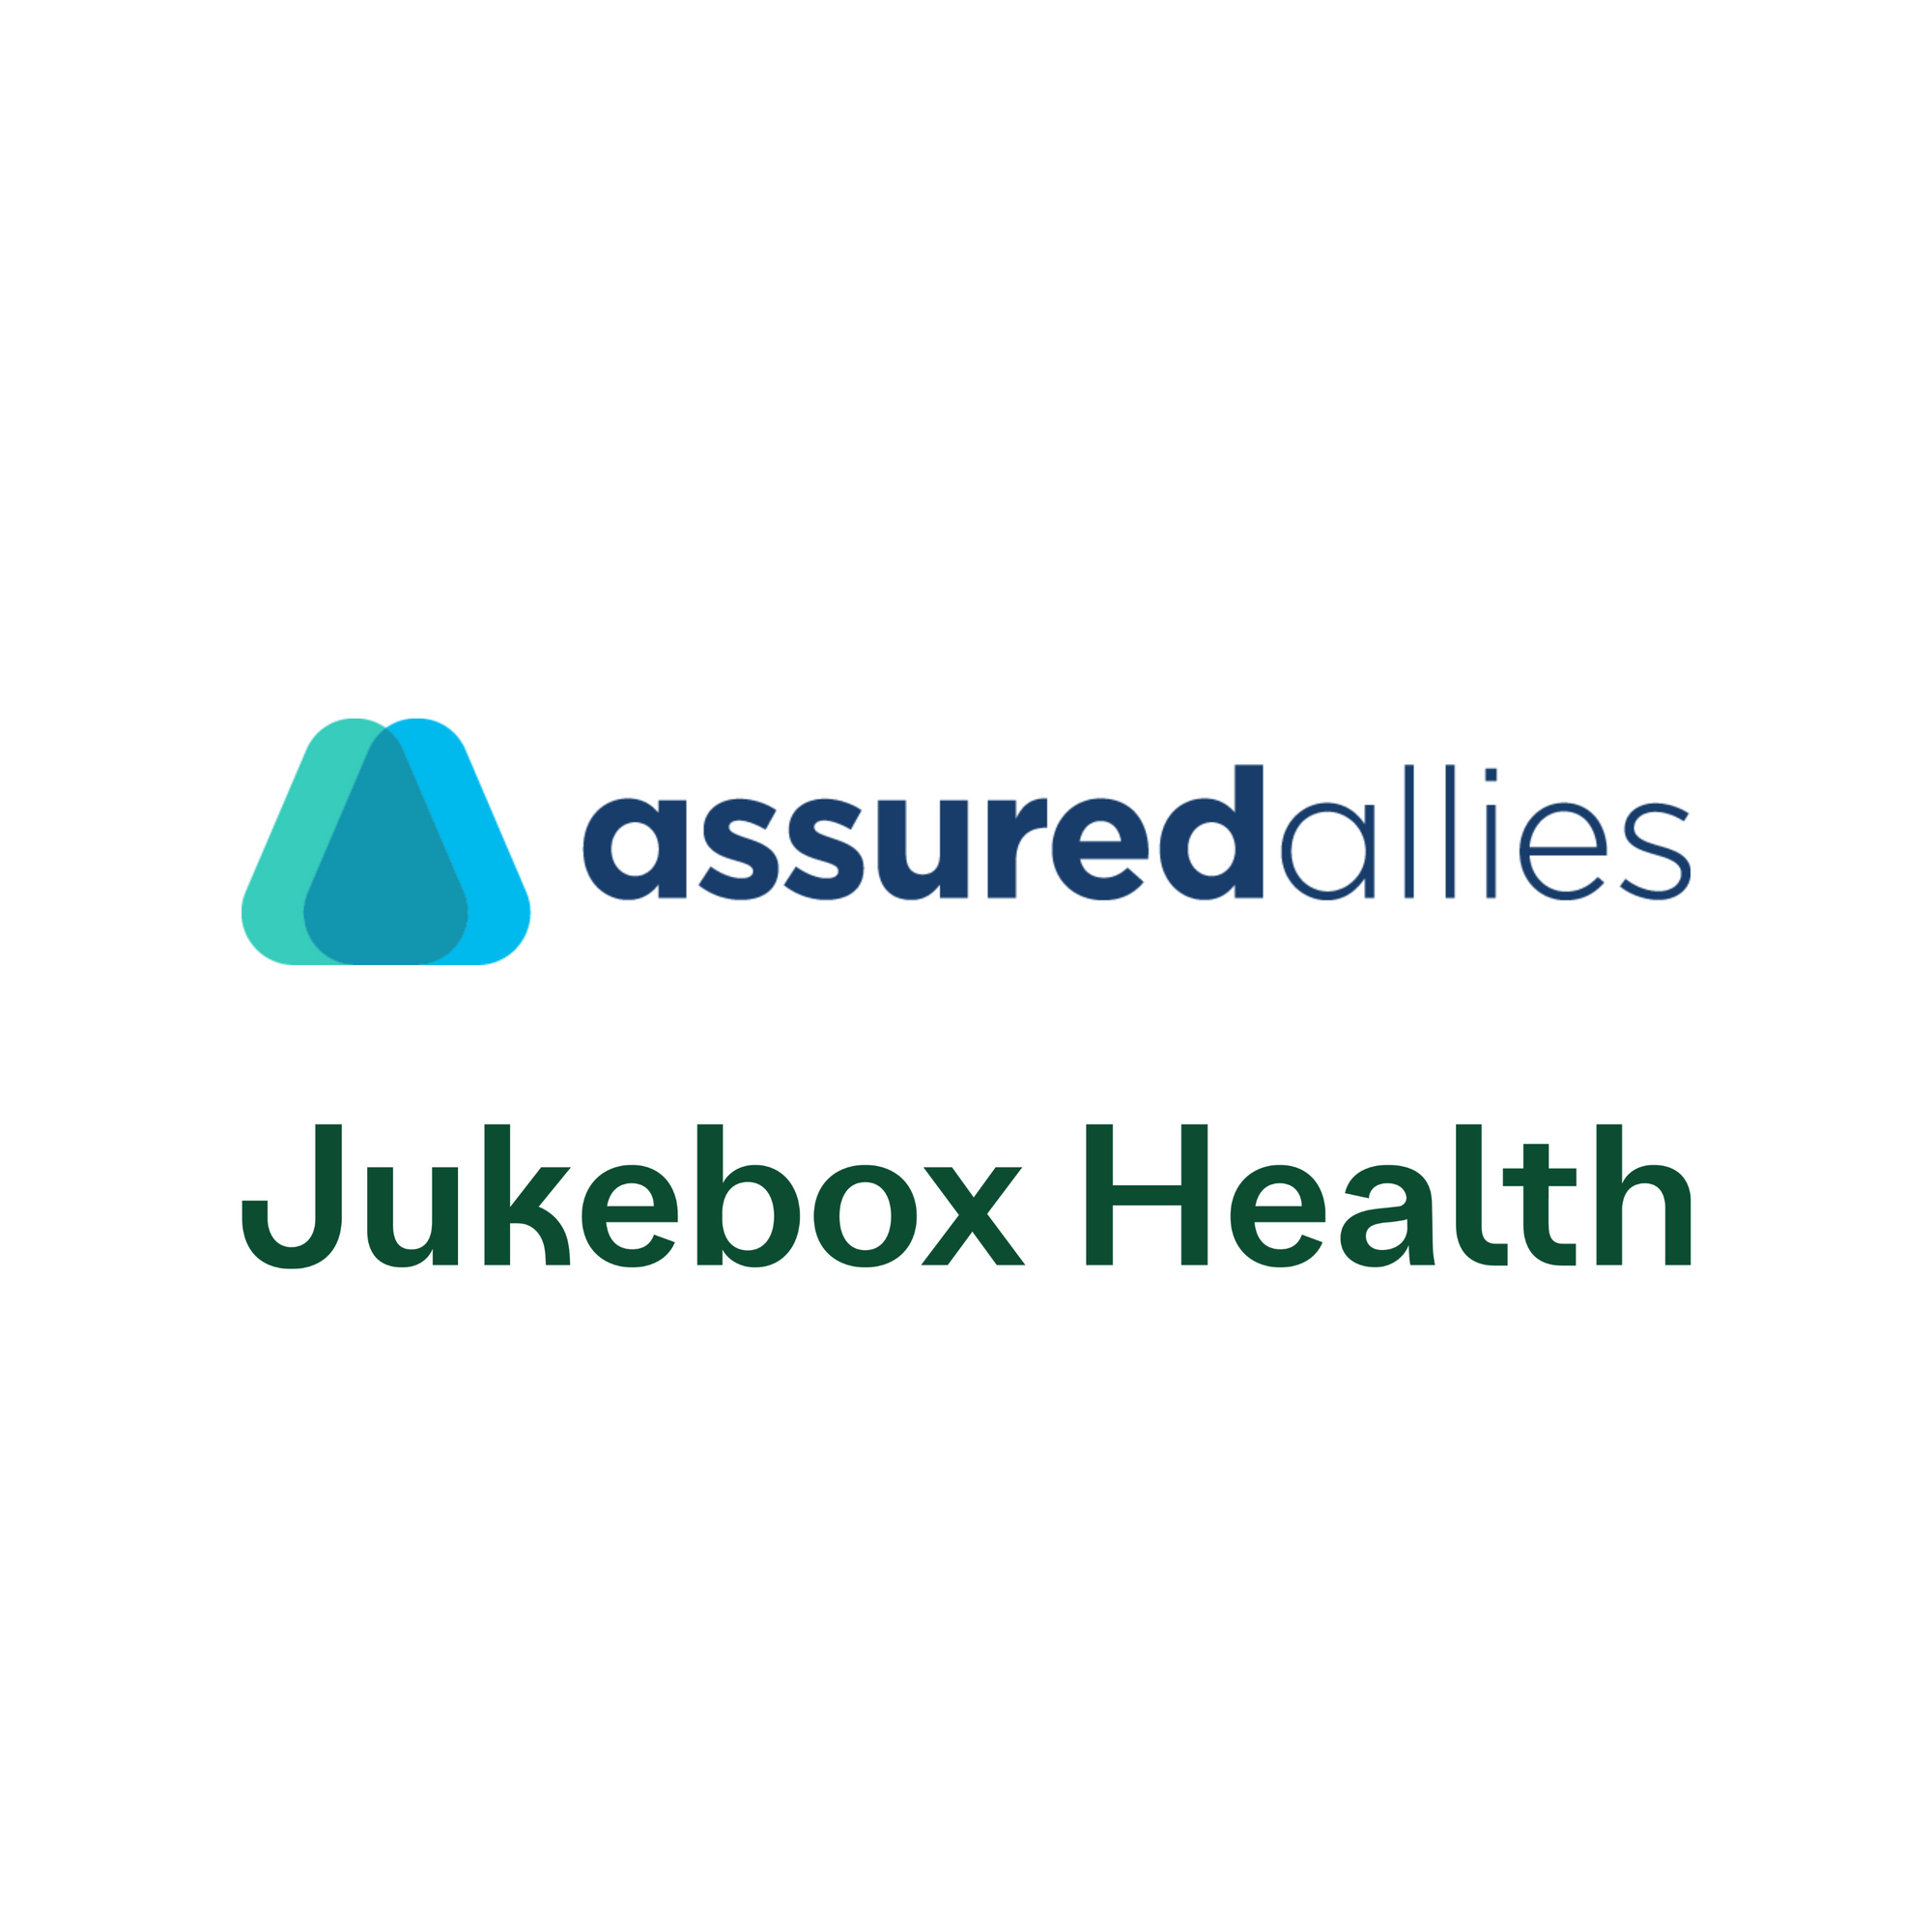 Assured Allies and Jukebox Health Partner to Empower Older Adults to Age in Place Safely and Independently